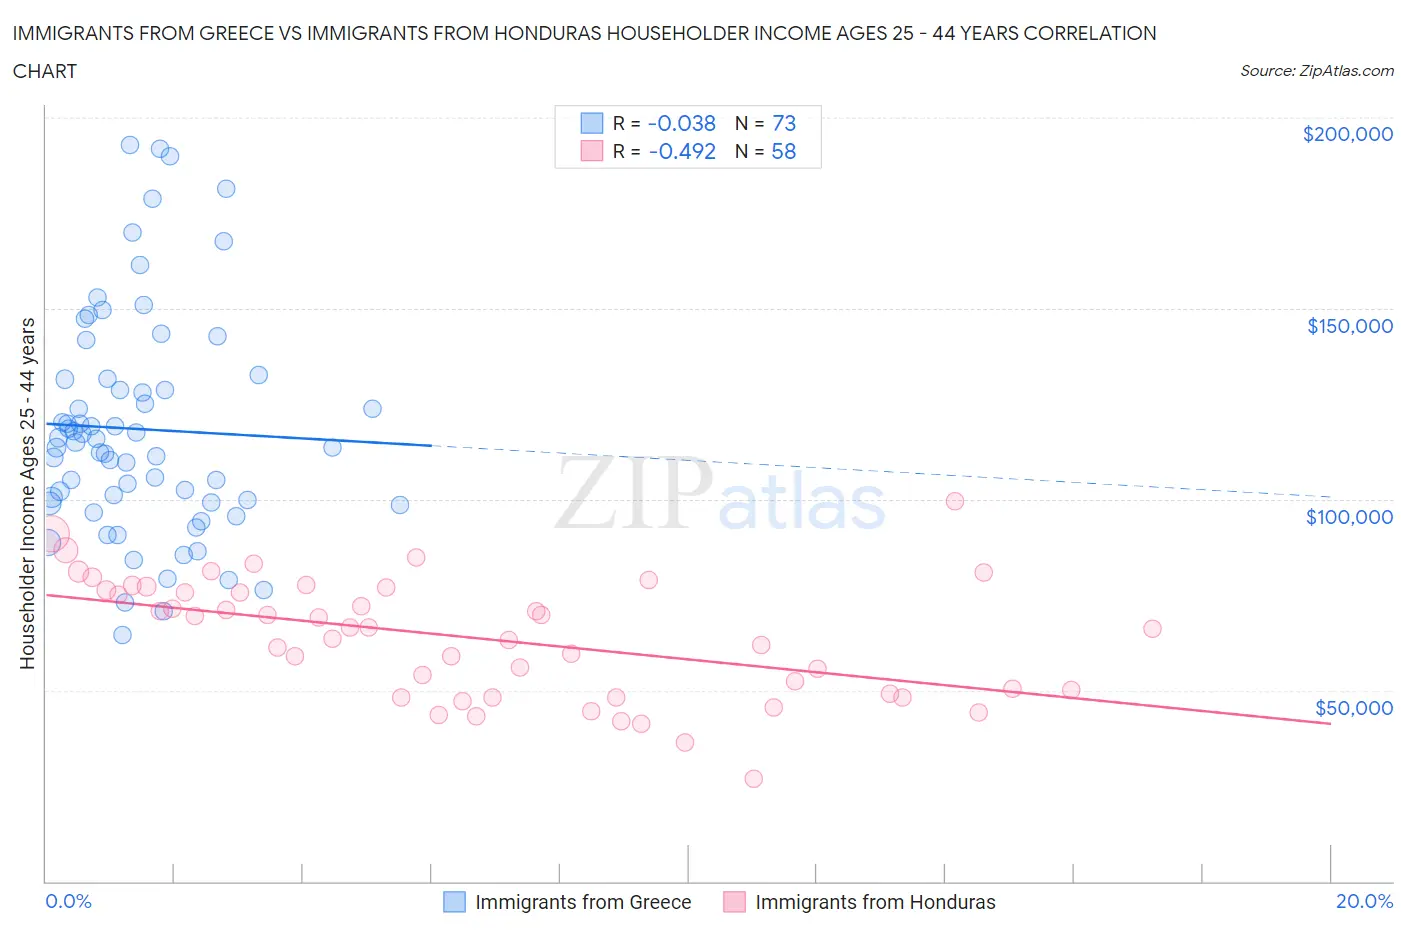 Immigrants from Greece vs Immigrants from Honduras Householder Income Ages 25 - 44 years